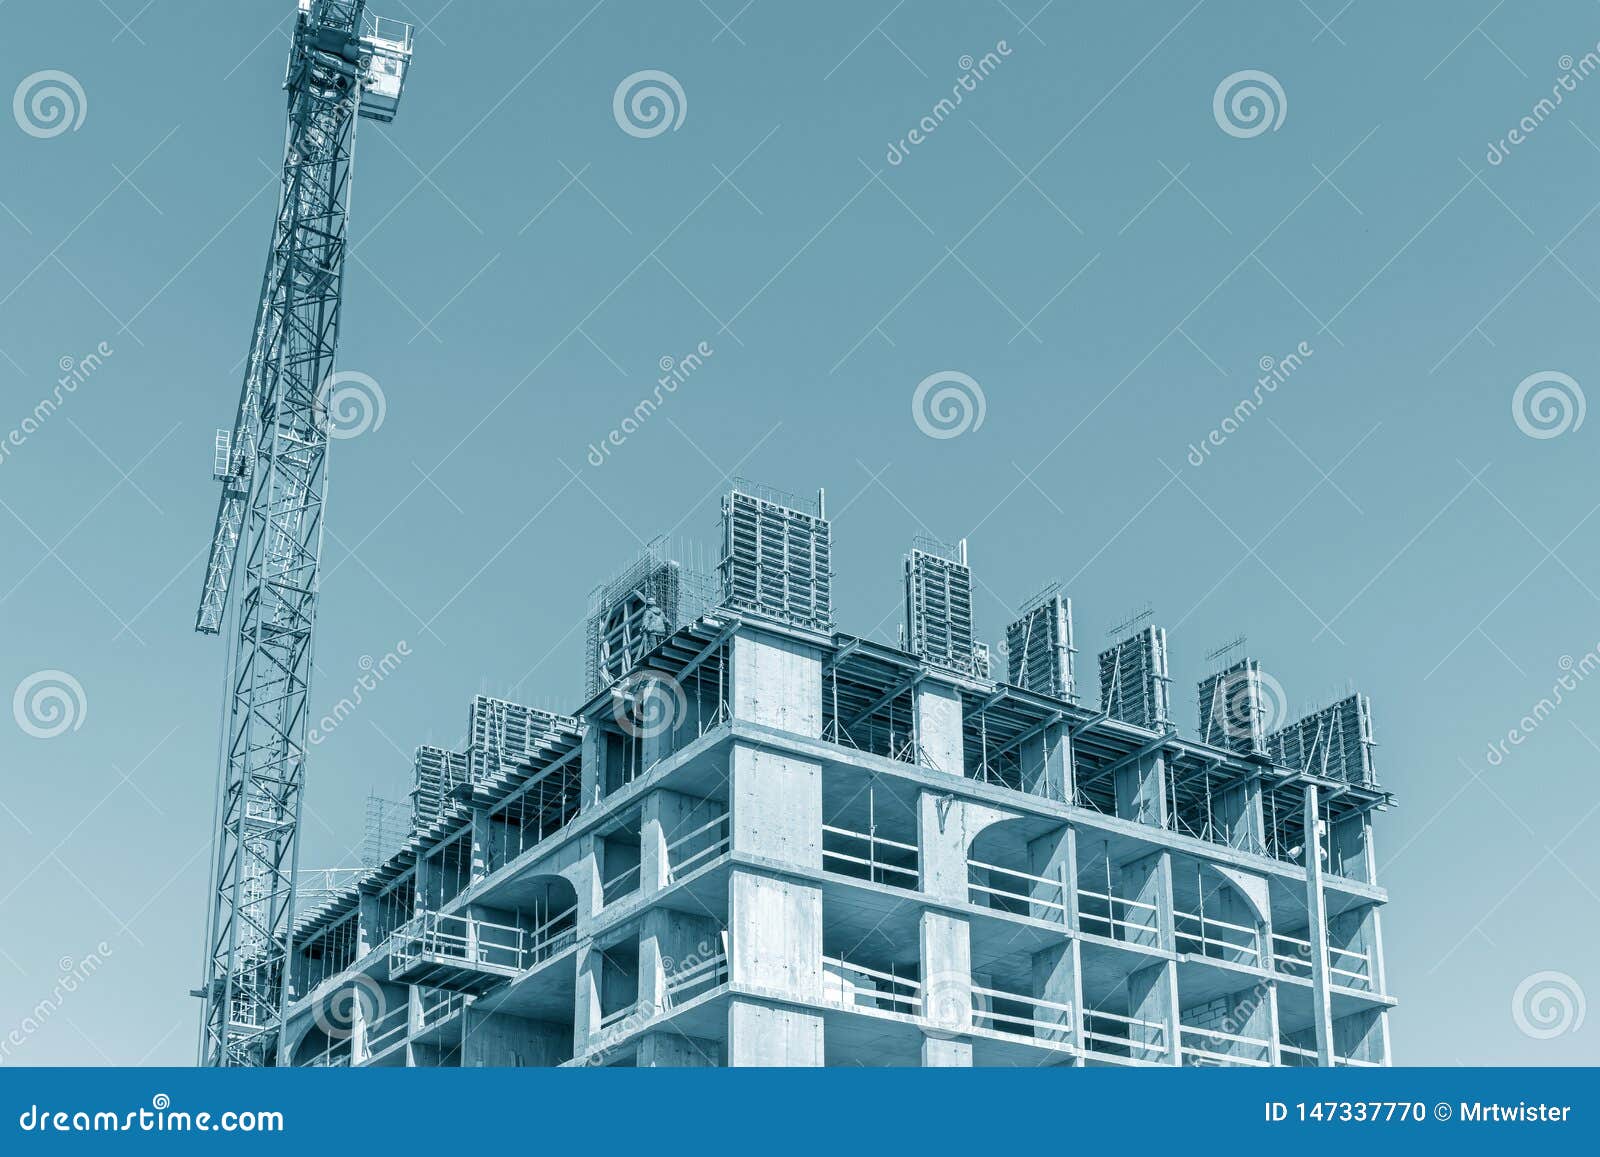 unfinished building with falsework against blue sky background